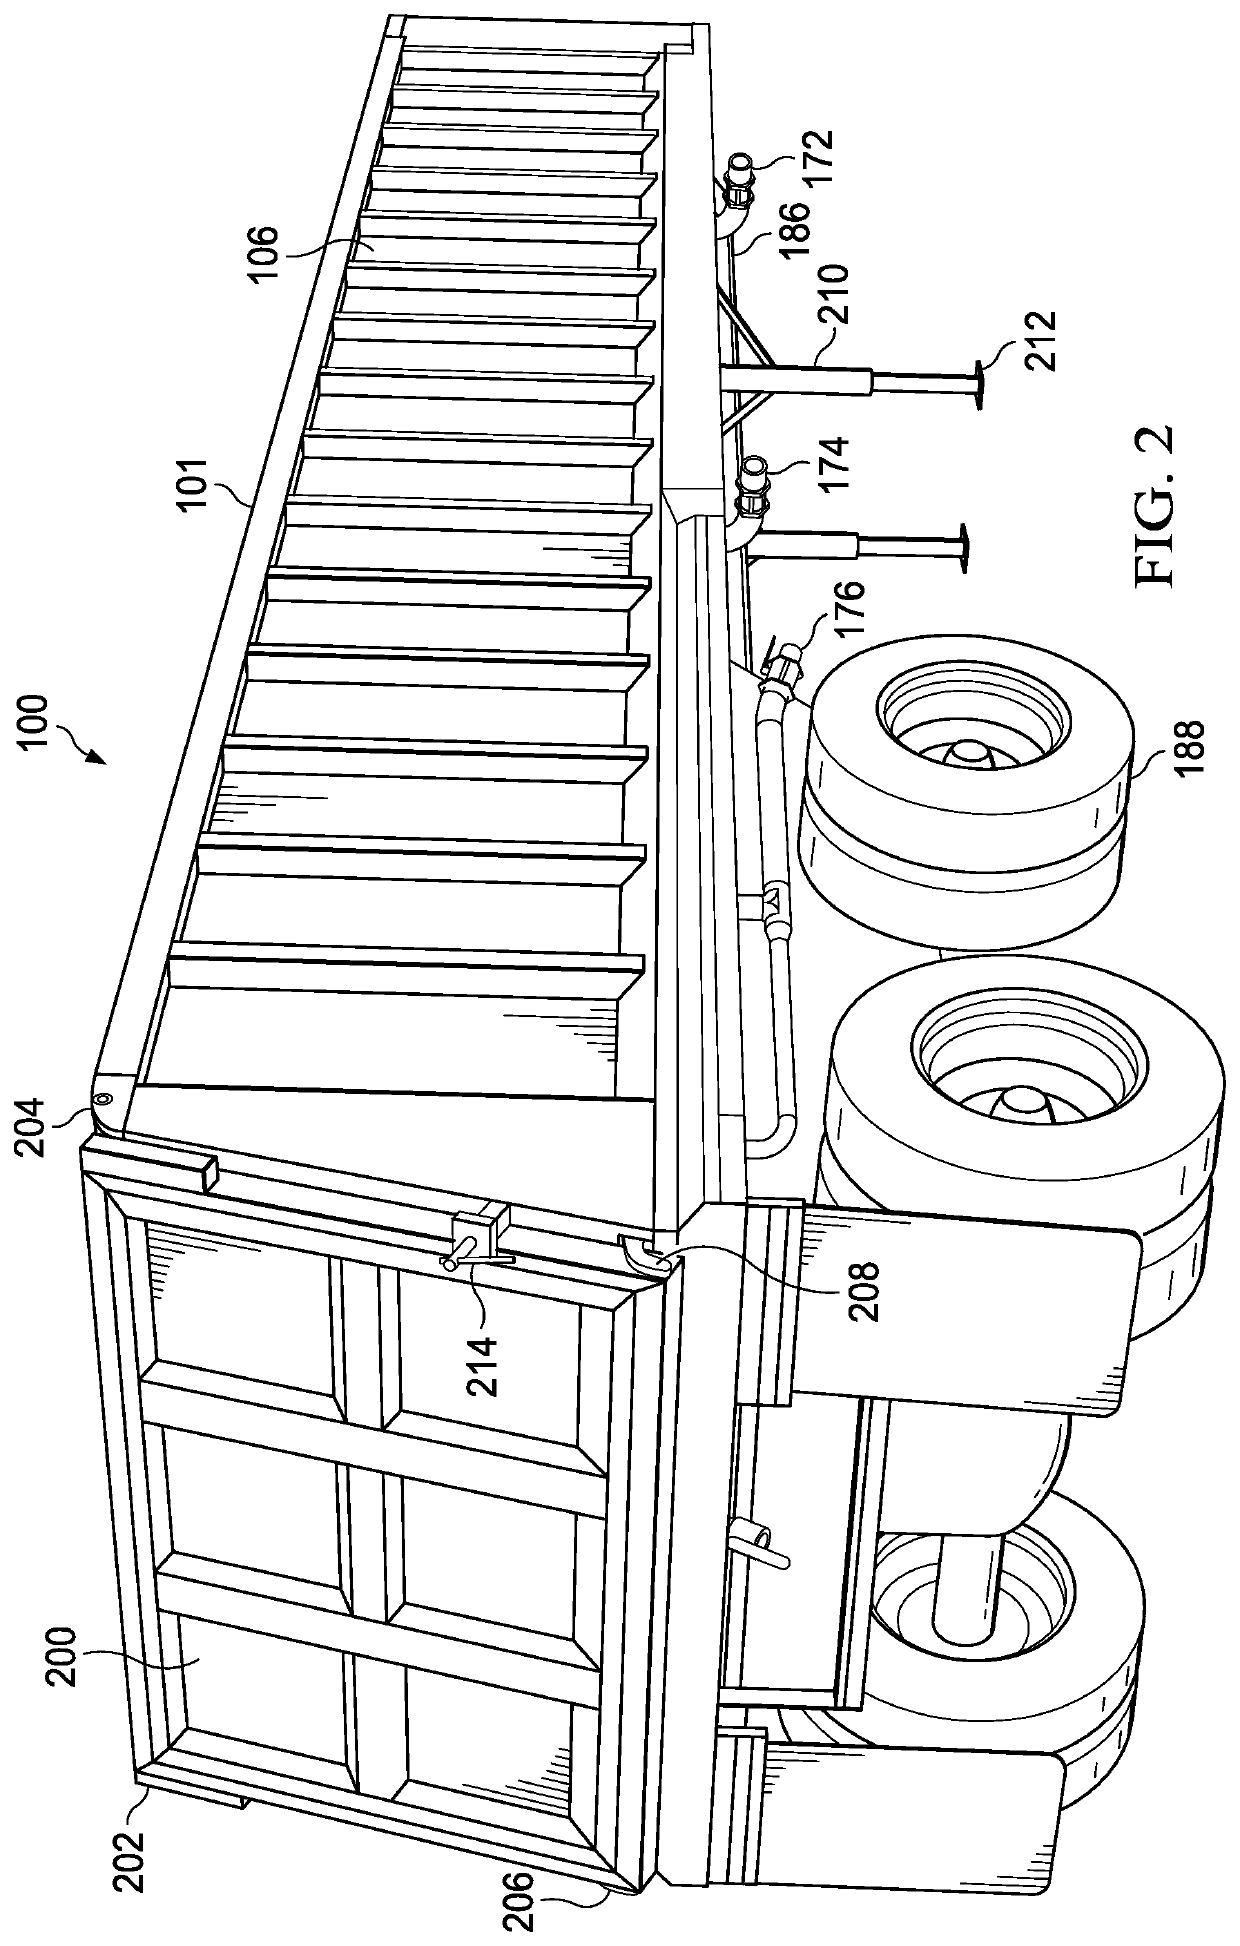 Fast flow dewatering trailer apparatus and method of use